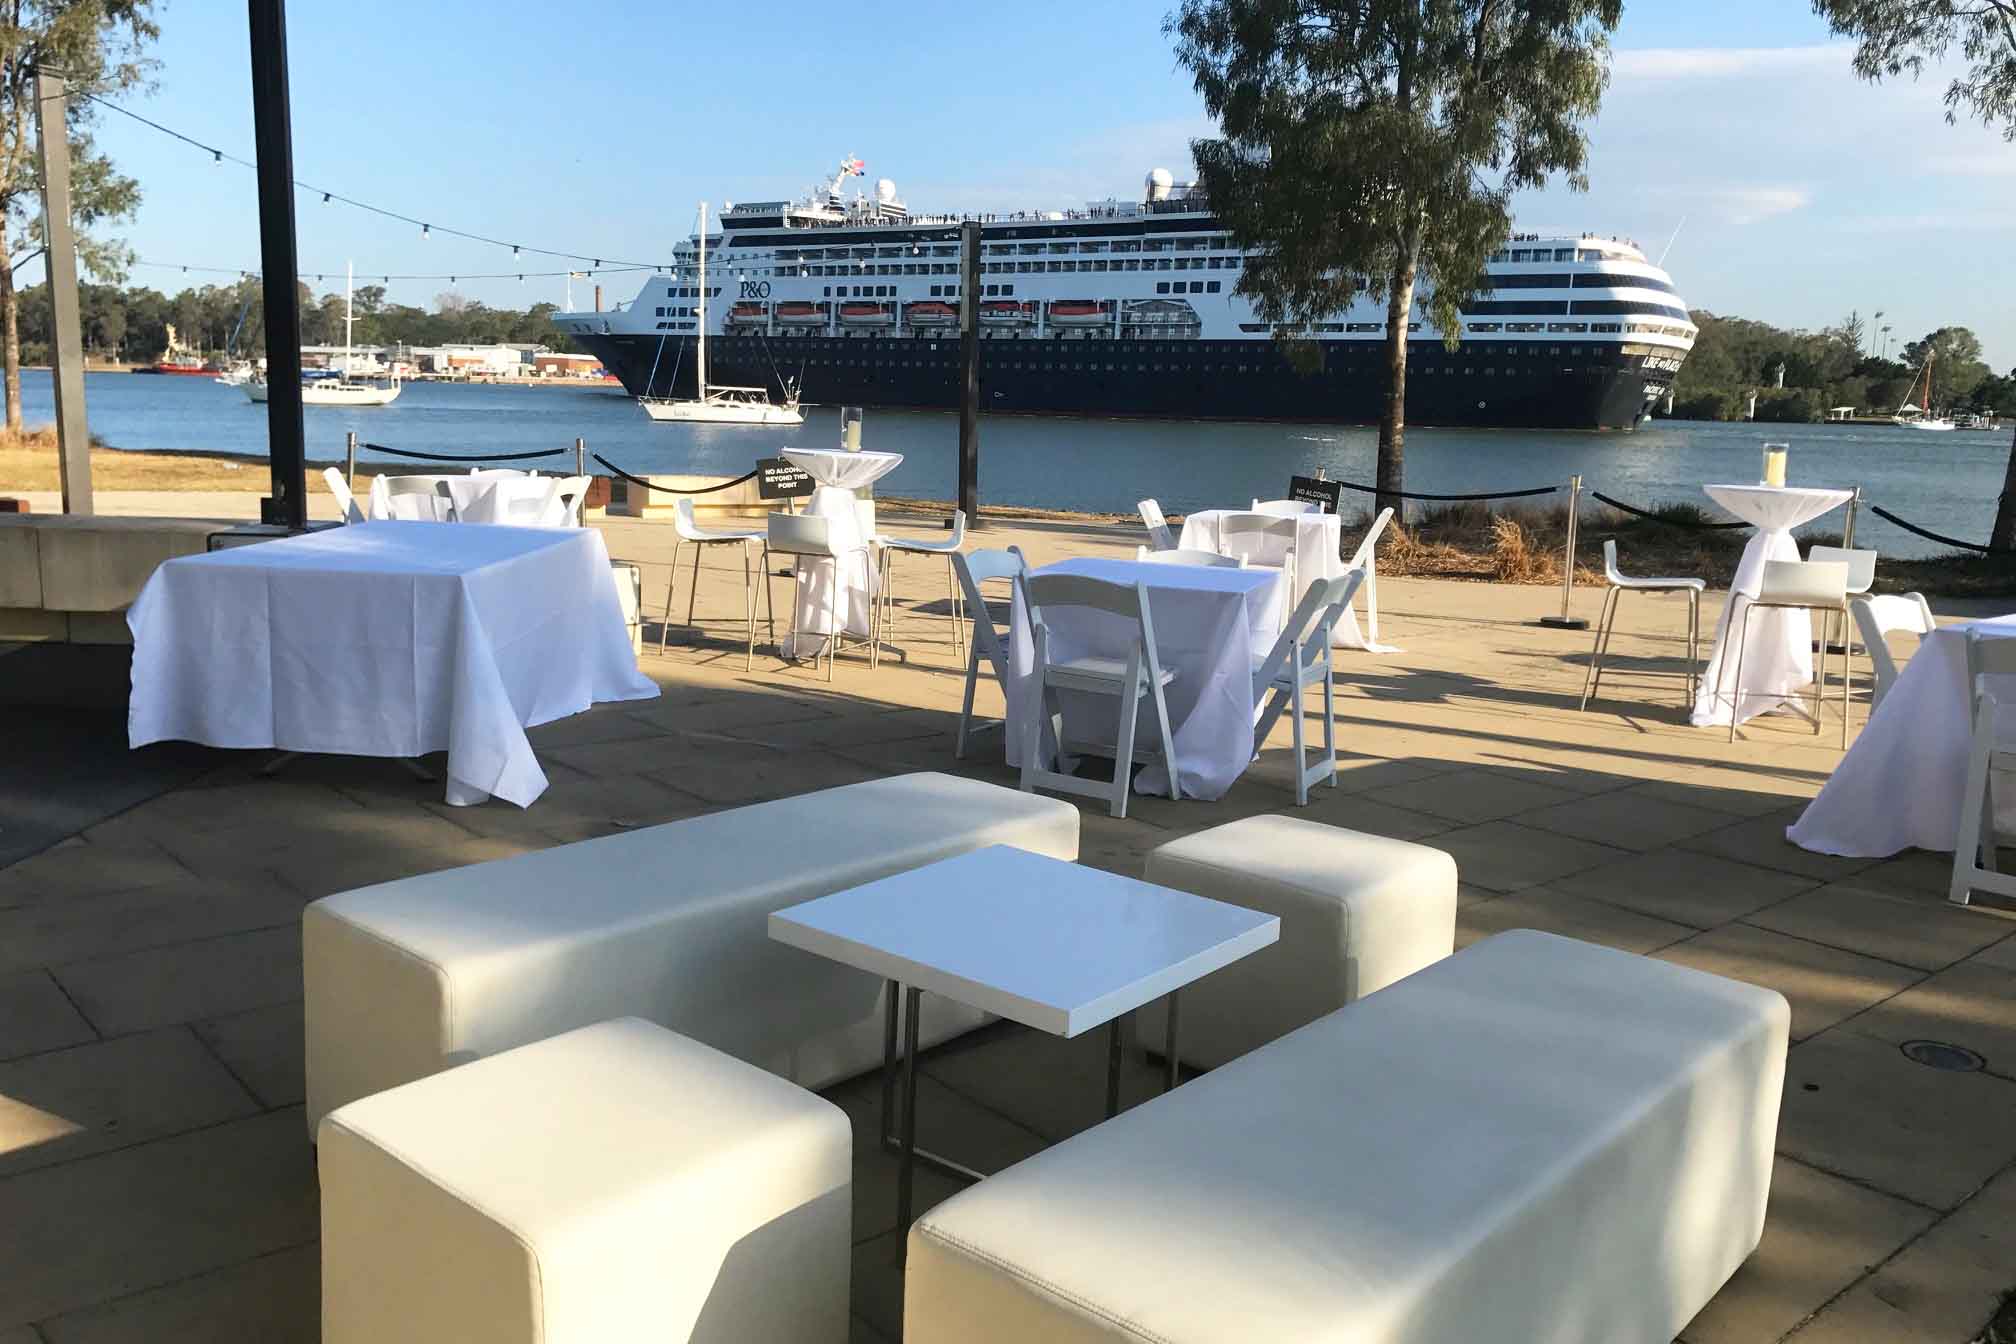 Northshore Harbour – Waterfront Dining